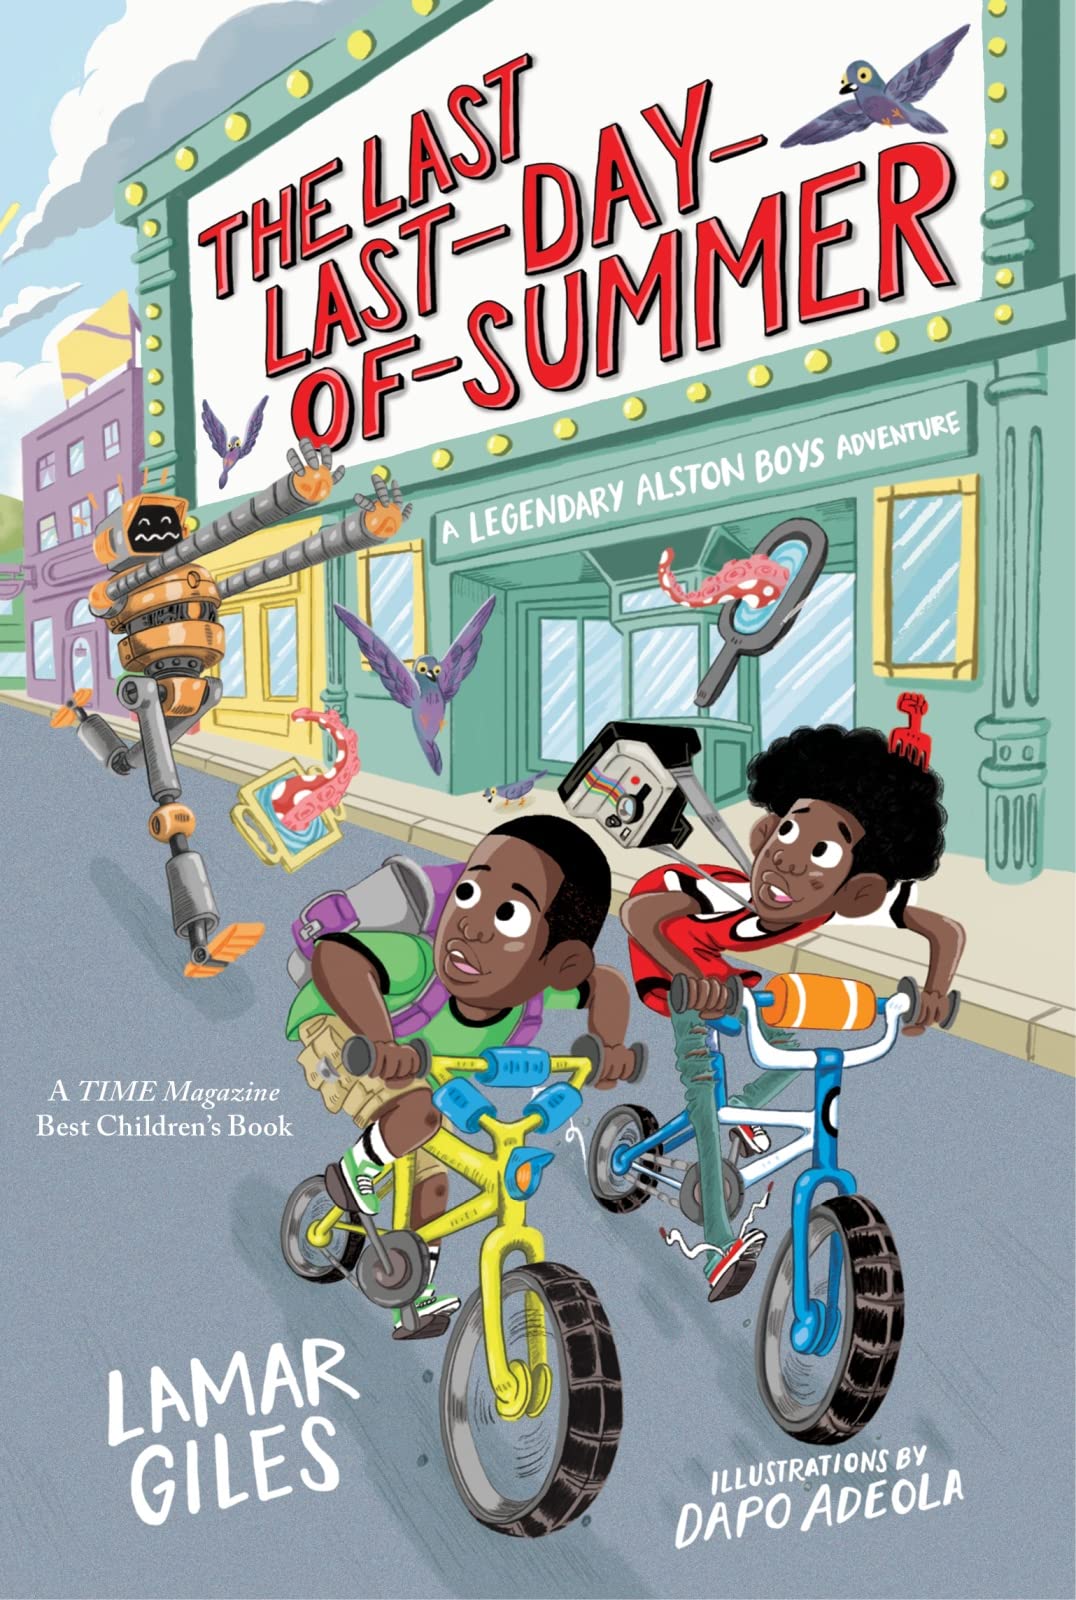 The Last Day of Summer by Lamar Giles